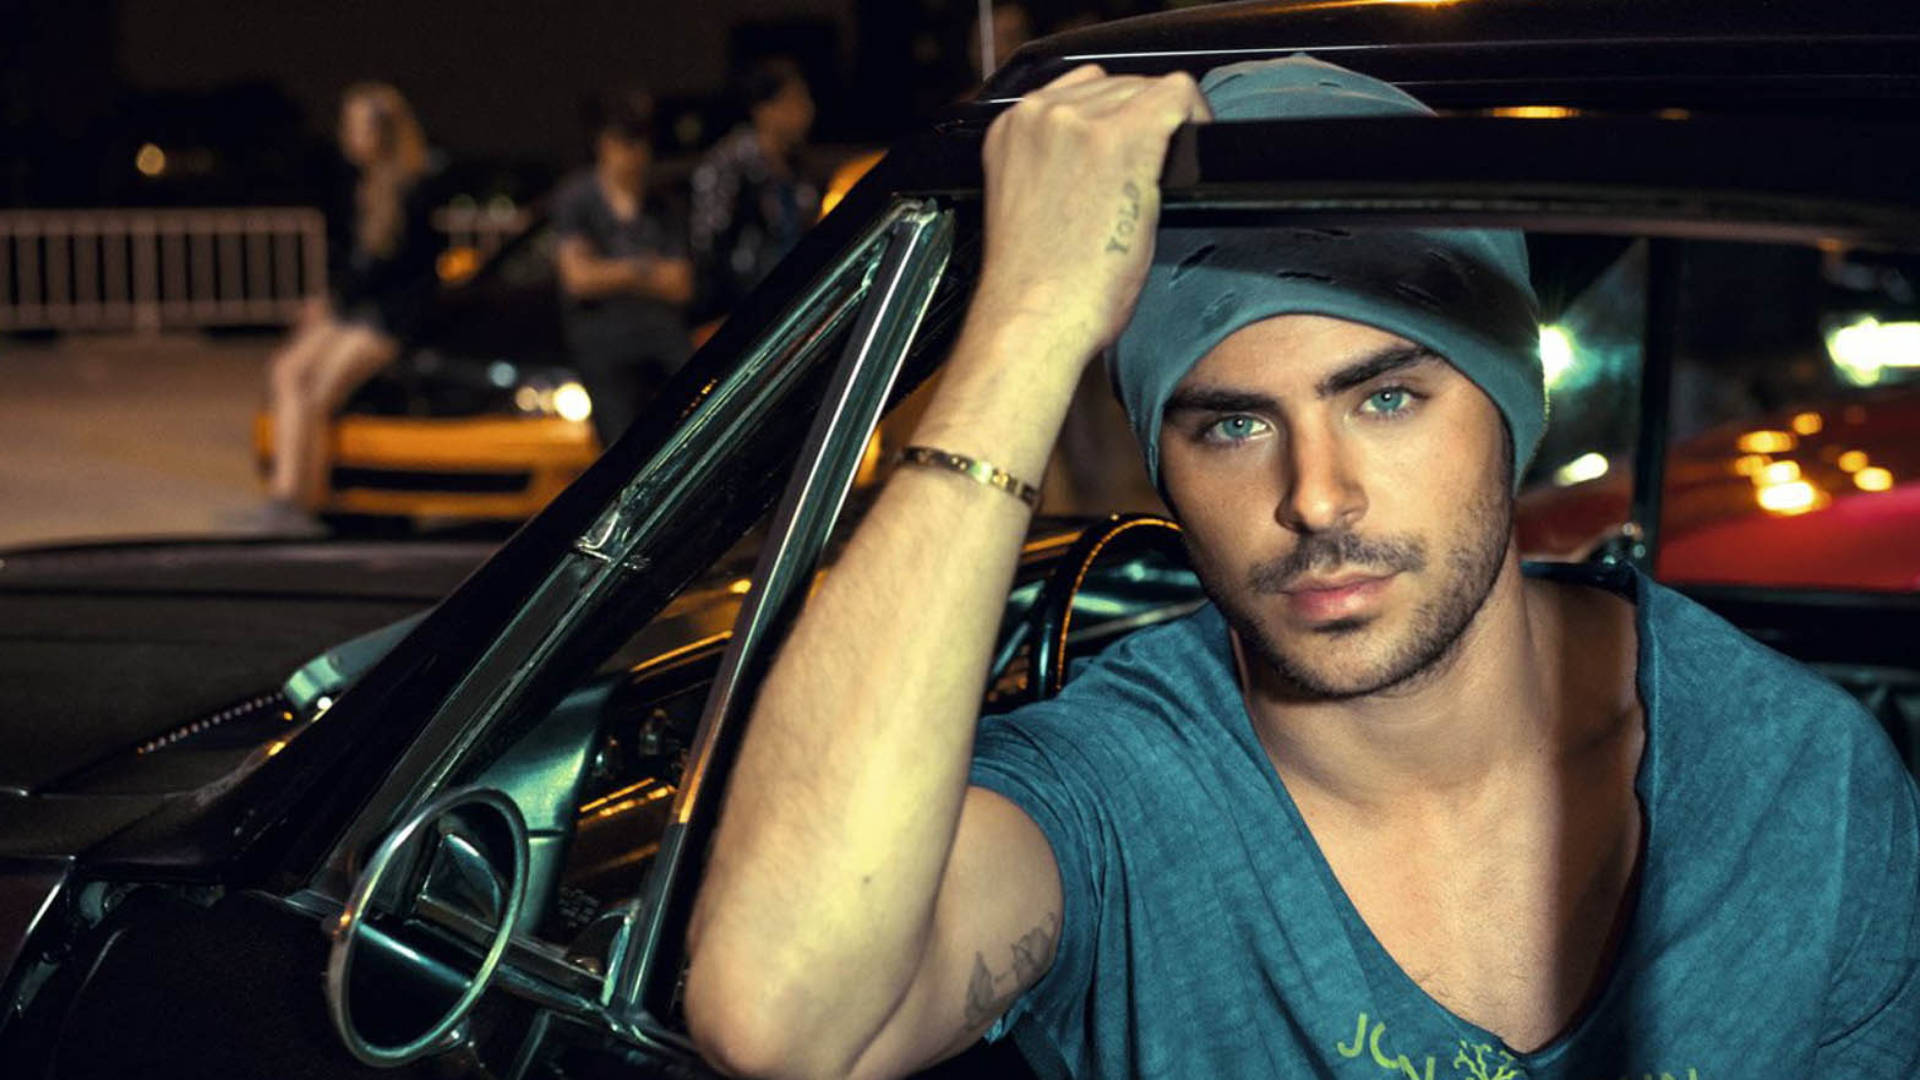 Zac Efron Enjoys A Drive In A Luxurious Car Background